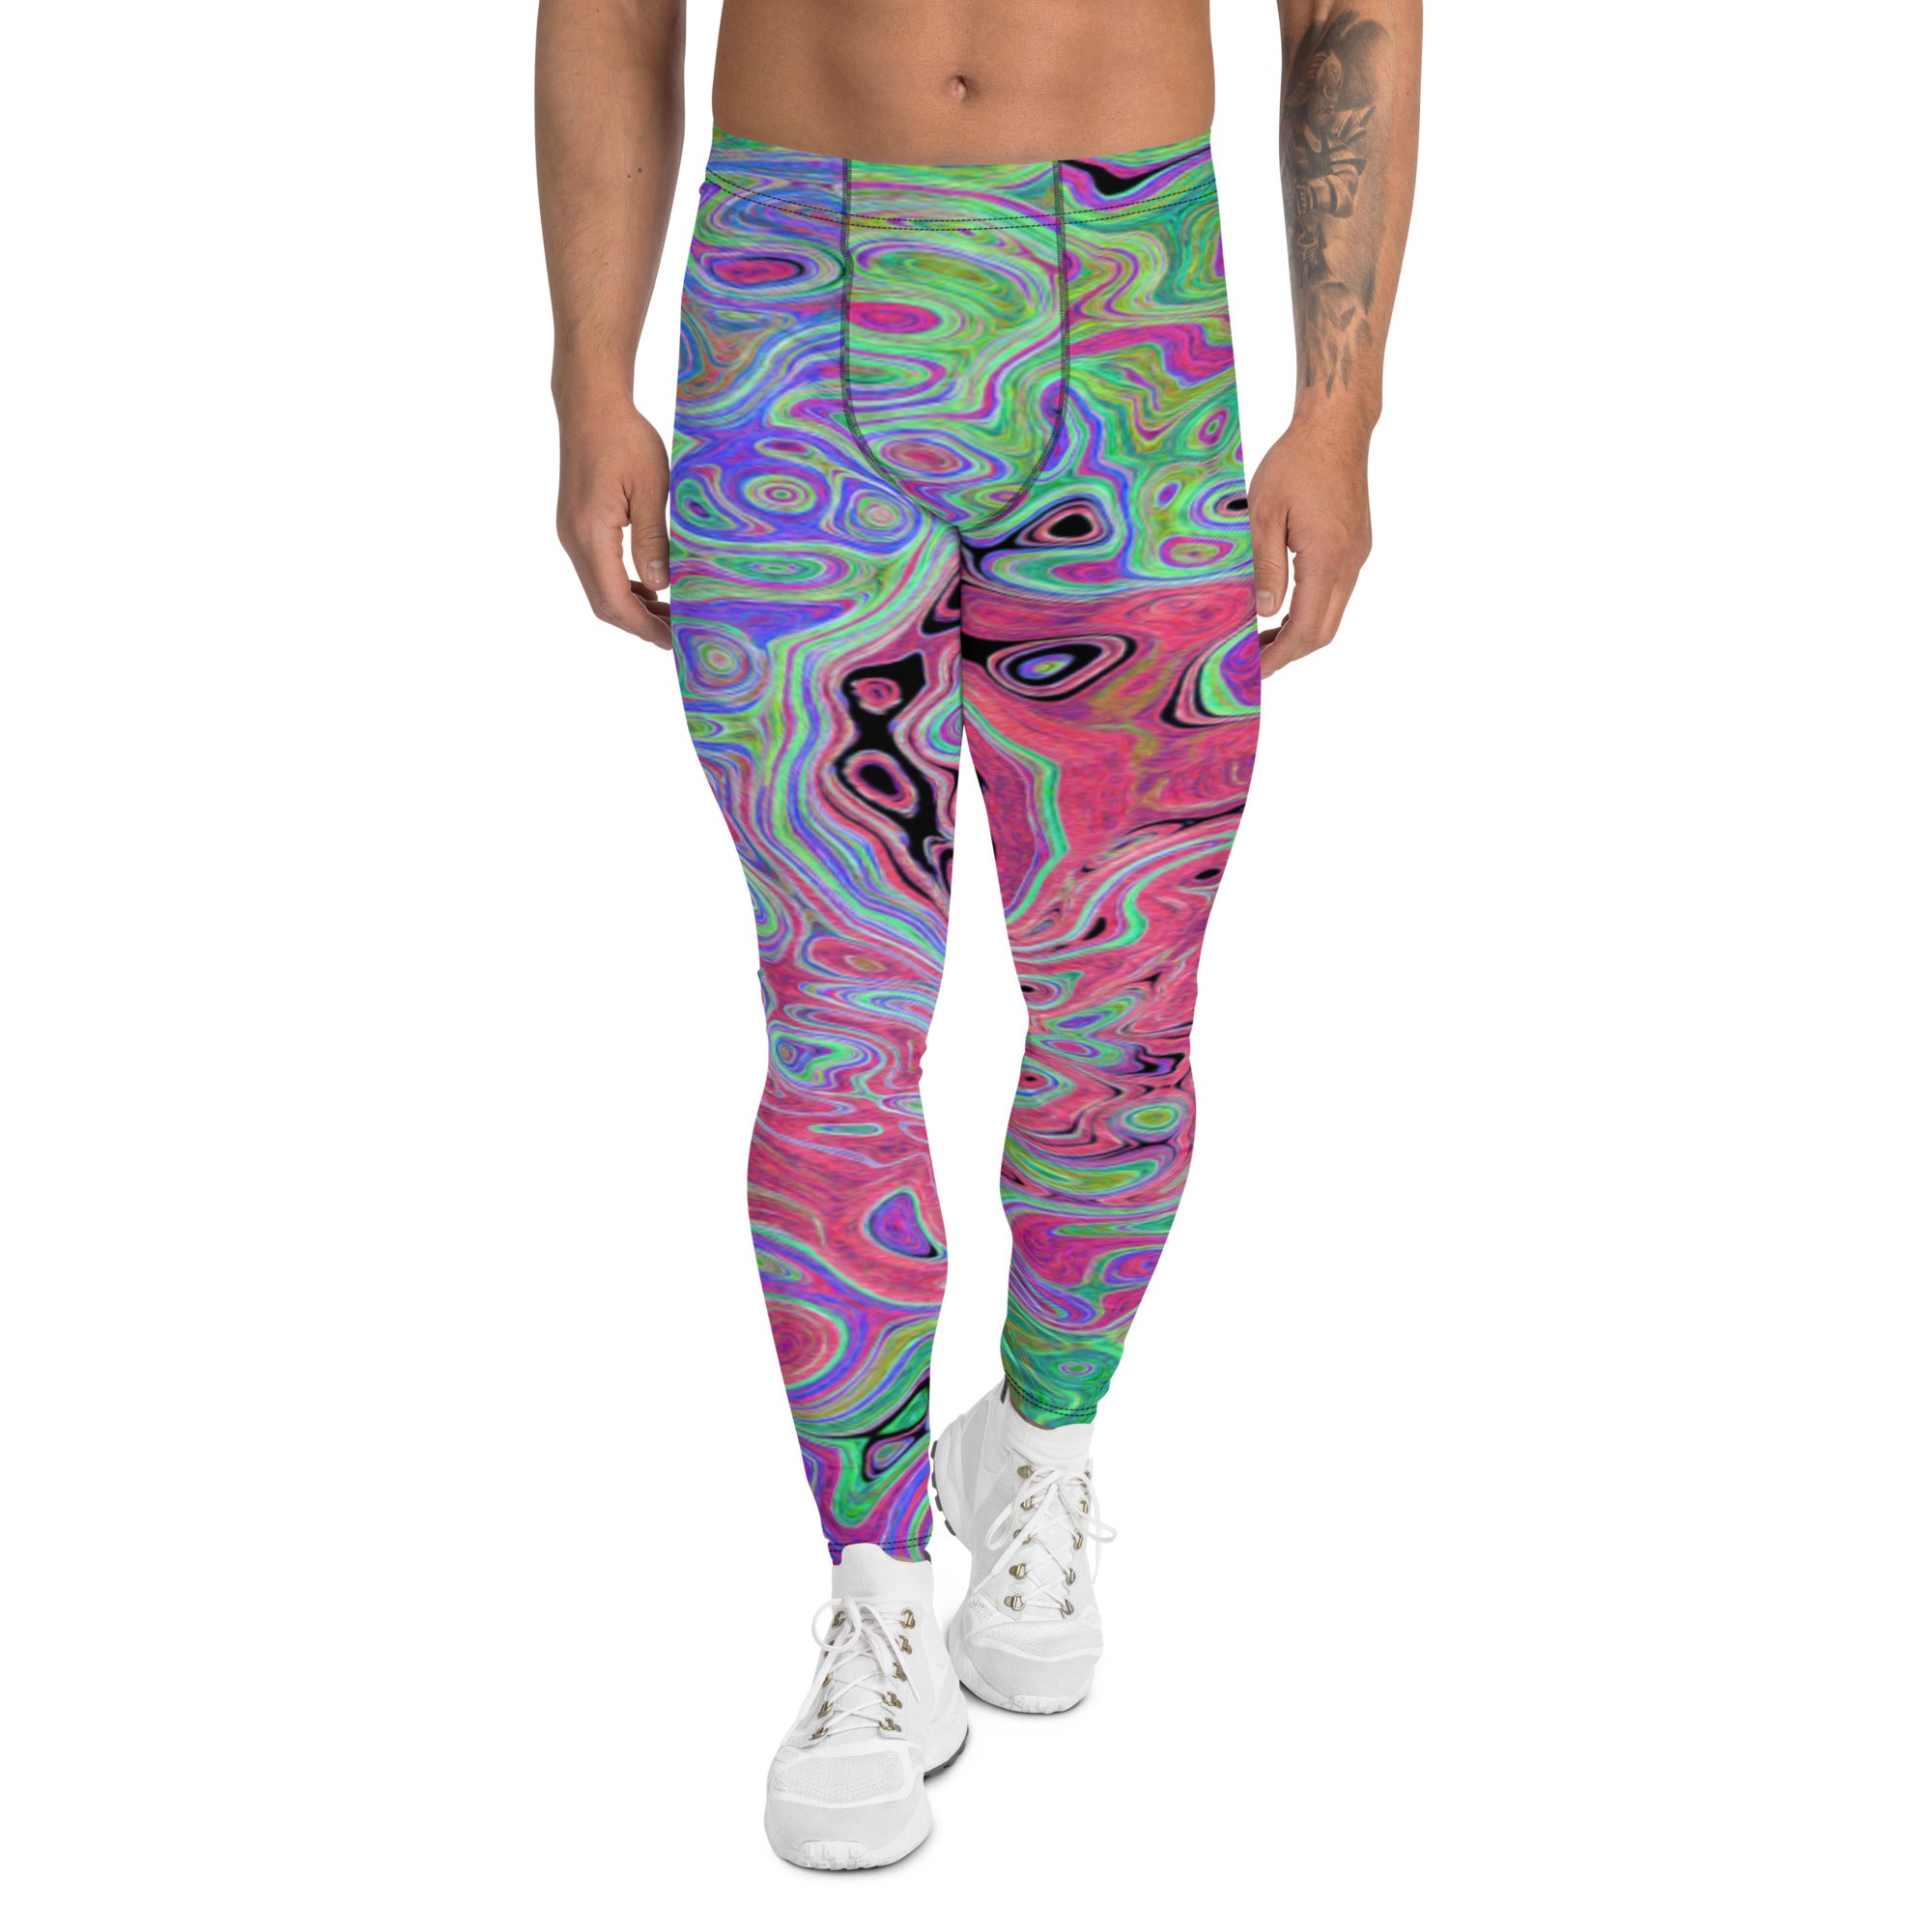 Men's Leggings, Pink and Lime Green Groovy Abstract Retro Swirl